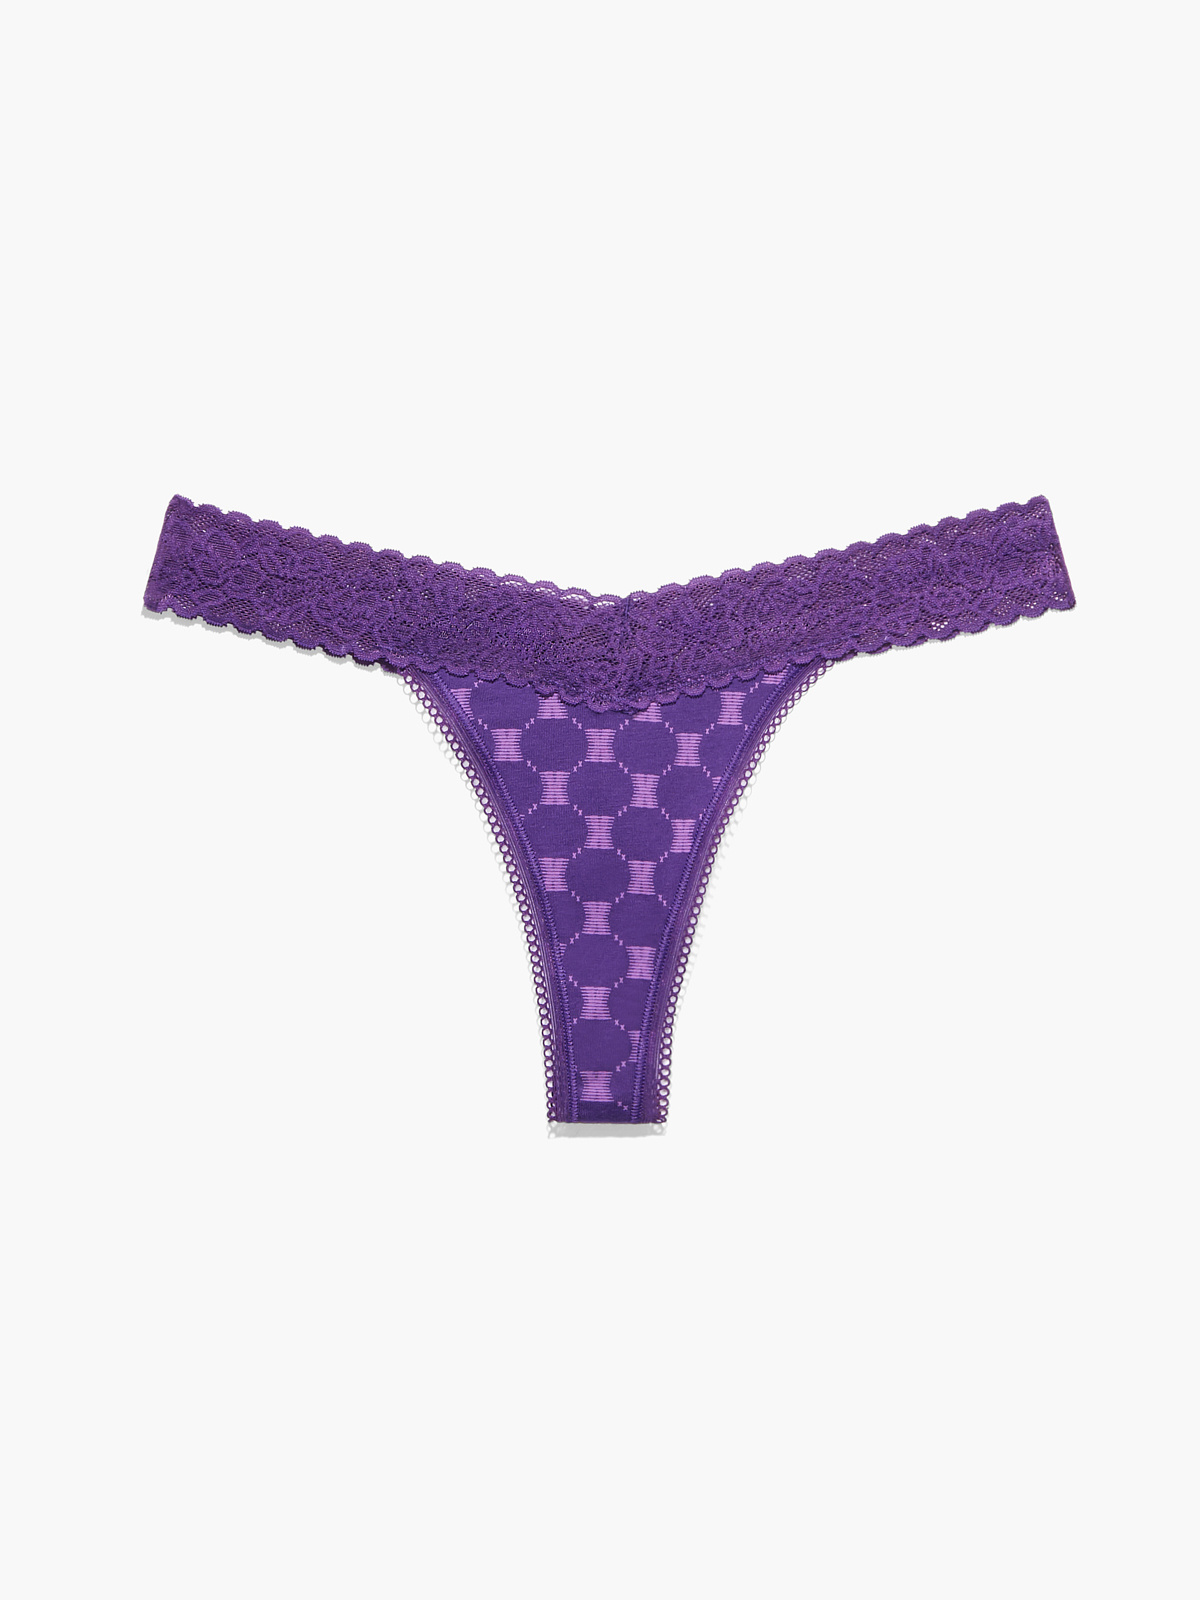 Galloon Lace and Mesh Thong 12163 - Iris – Purple Cactus Lingerie